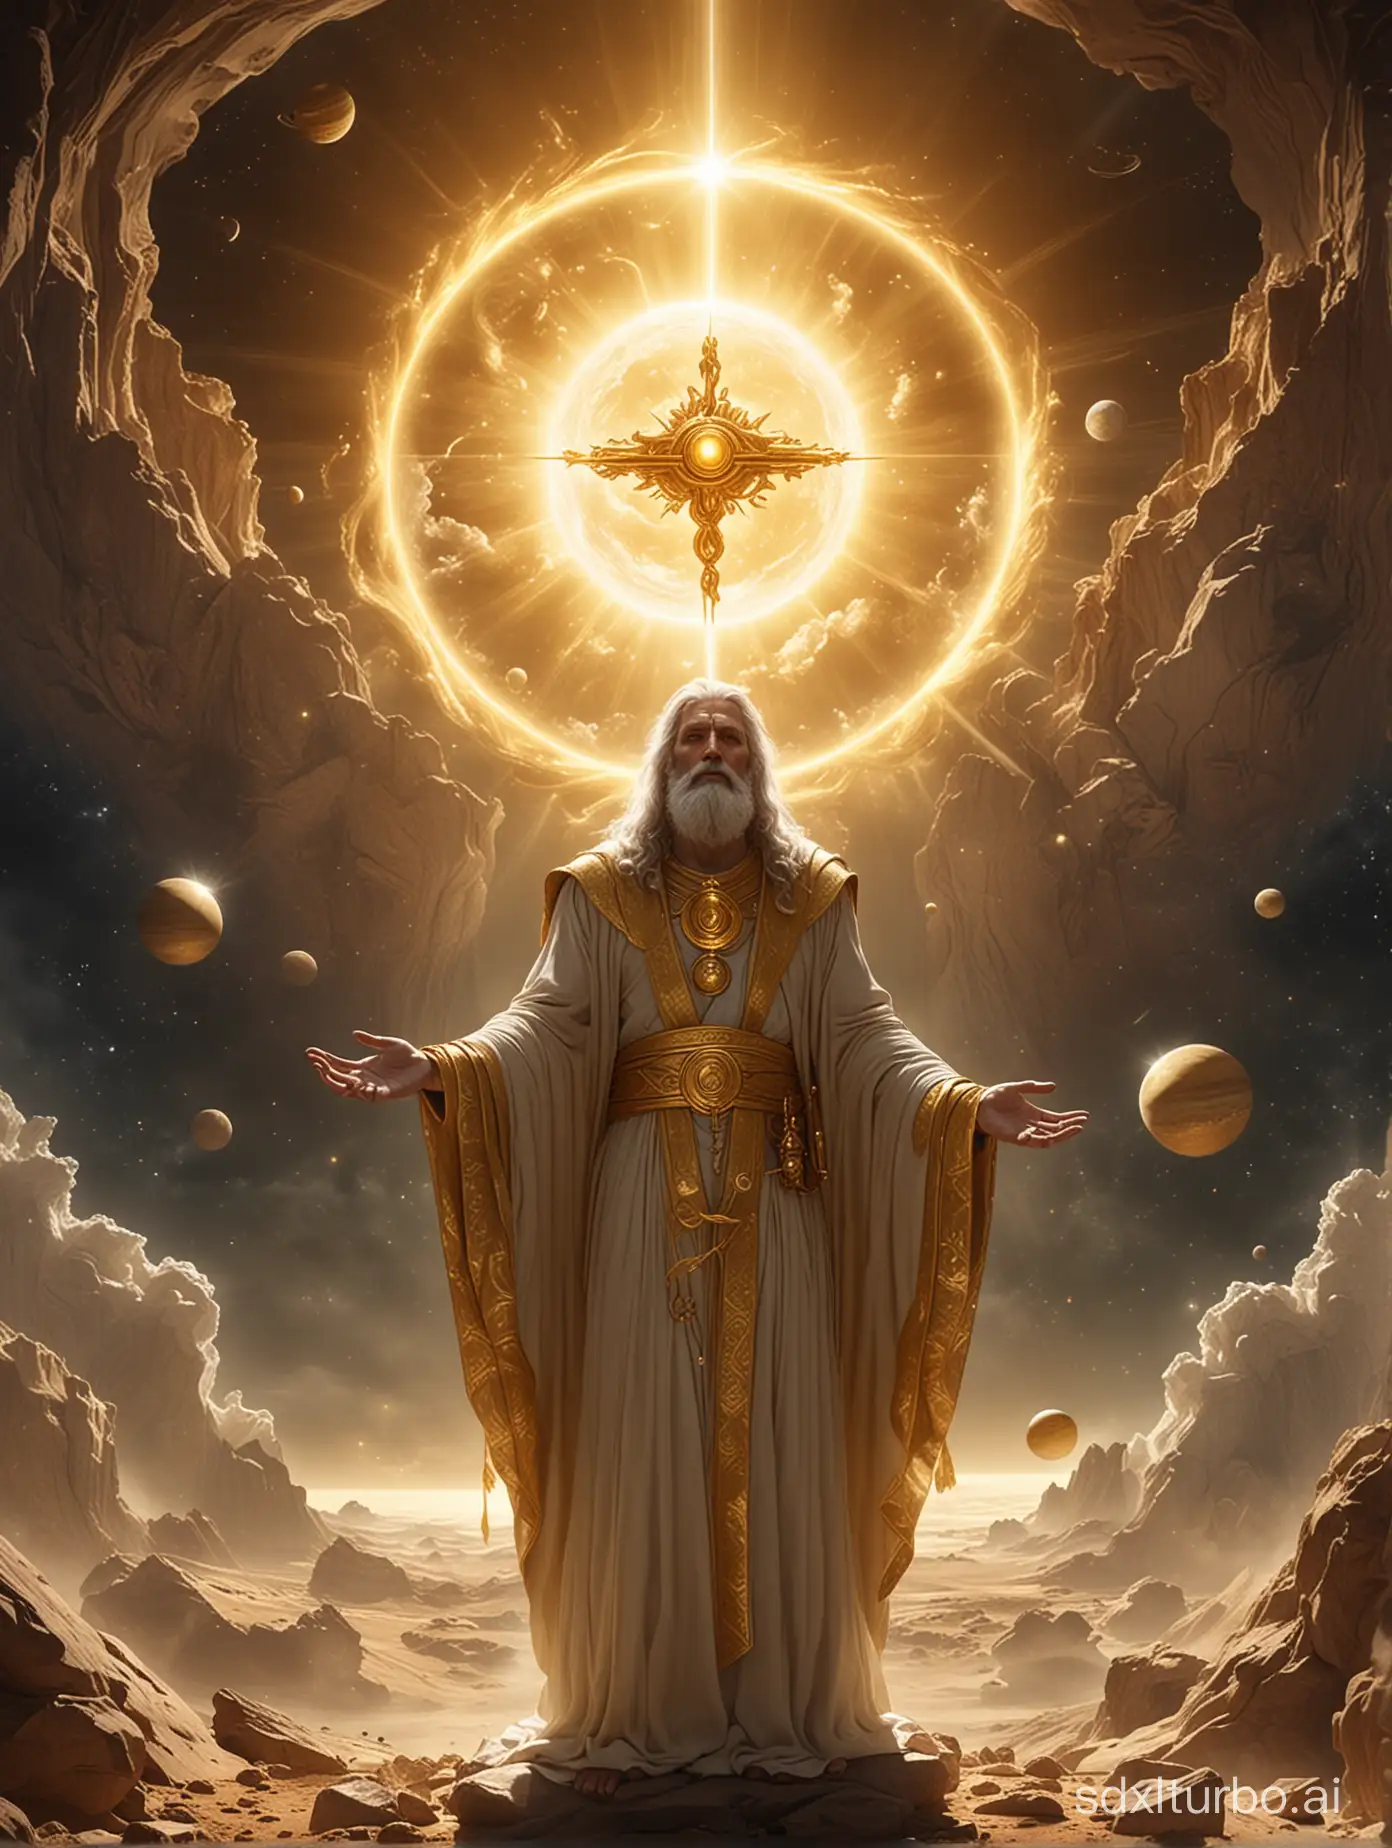 god looking to the left while raising a golden spectre, planets behind him, arranged before the sun